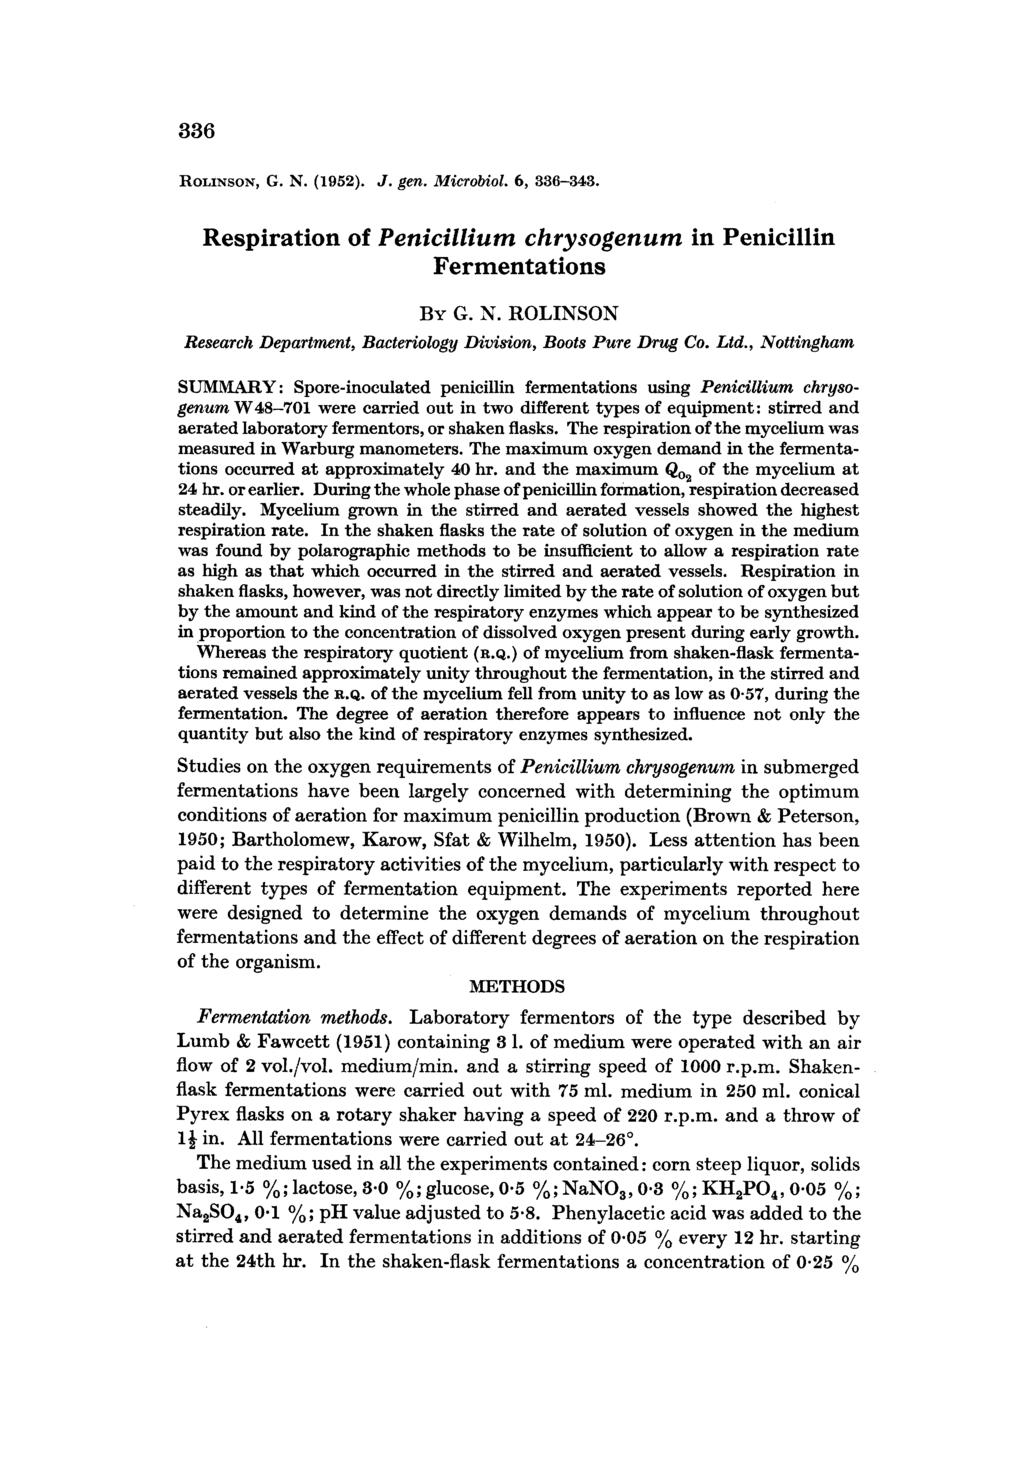 336 ROLINSON, G. N. (1952). J. gen. Microbiol. 6, 336-343. Respiration of Penicillium chrysogenum in Penicillin Fer rnent at ions BY G. N. ROLINSON Research Department, Bacteriology Division, Boots Pure Drug Co.